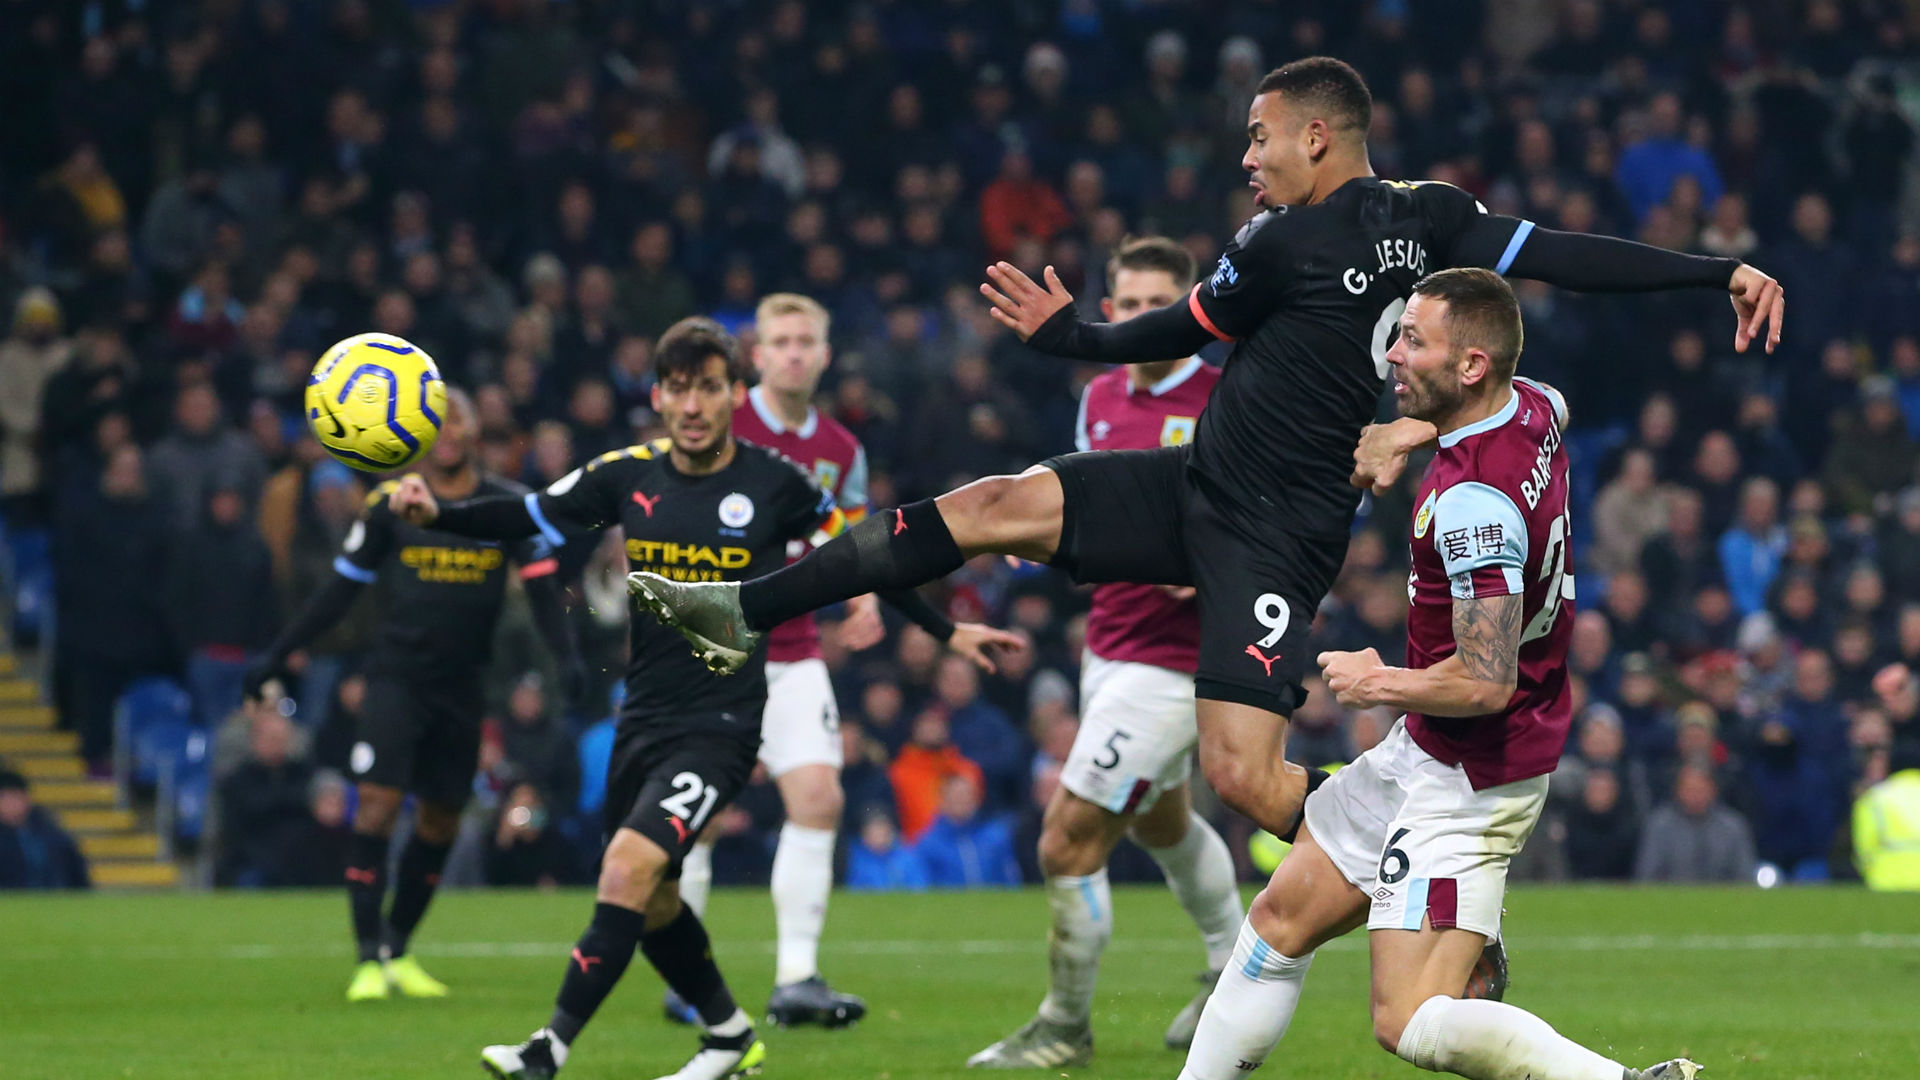 Gabriel Jesus ended a five-match wait for a Premier League goal with his brace against Burnley, and Pep Guardiola never doubted the forward.